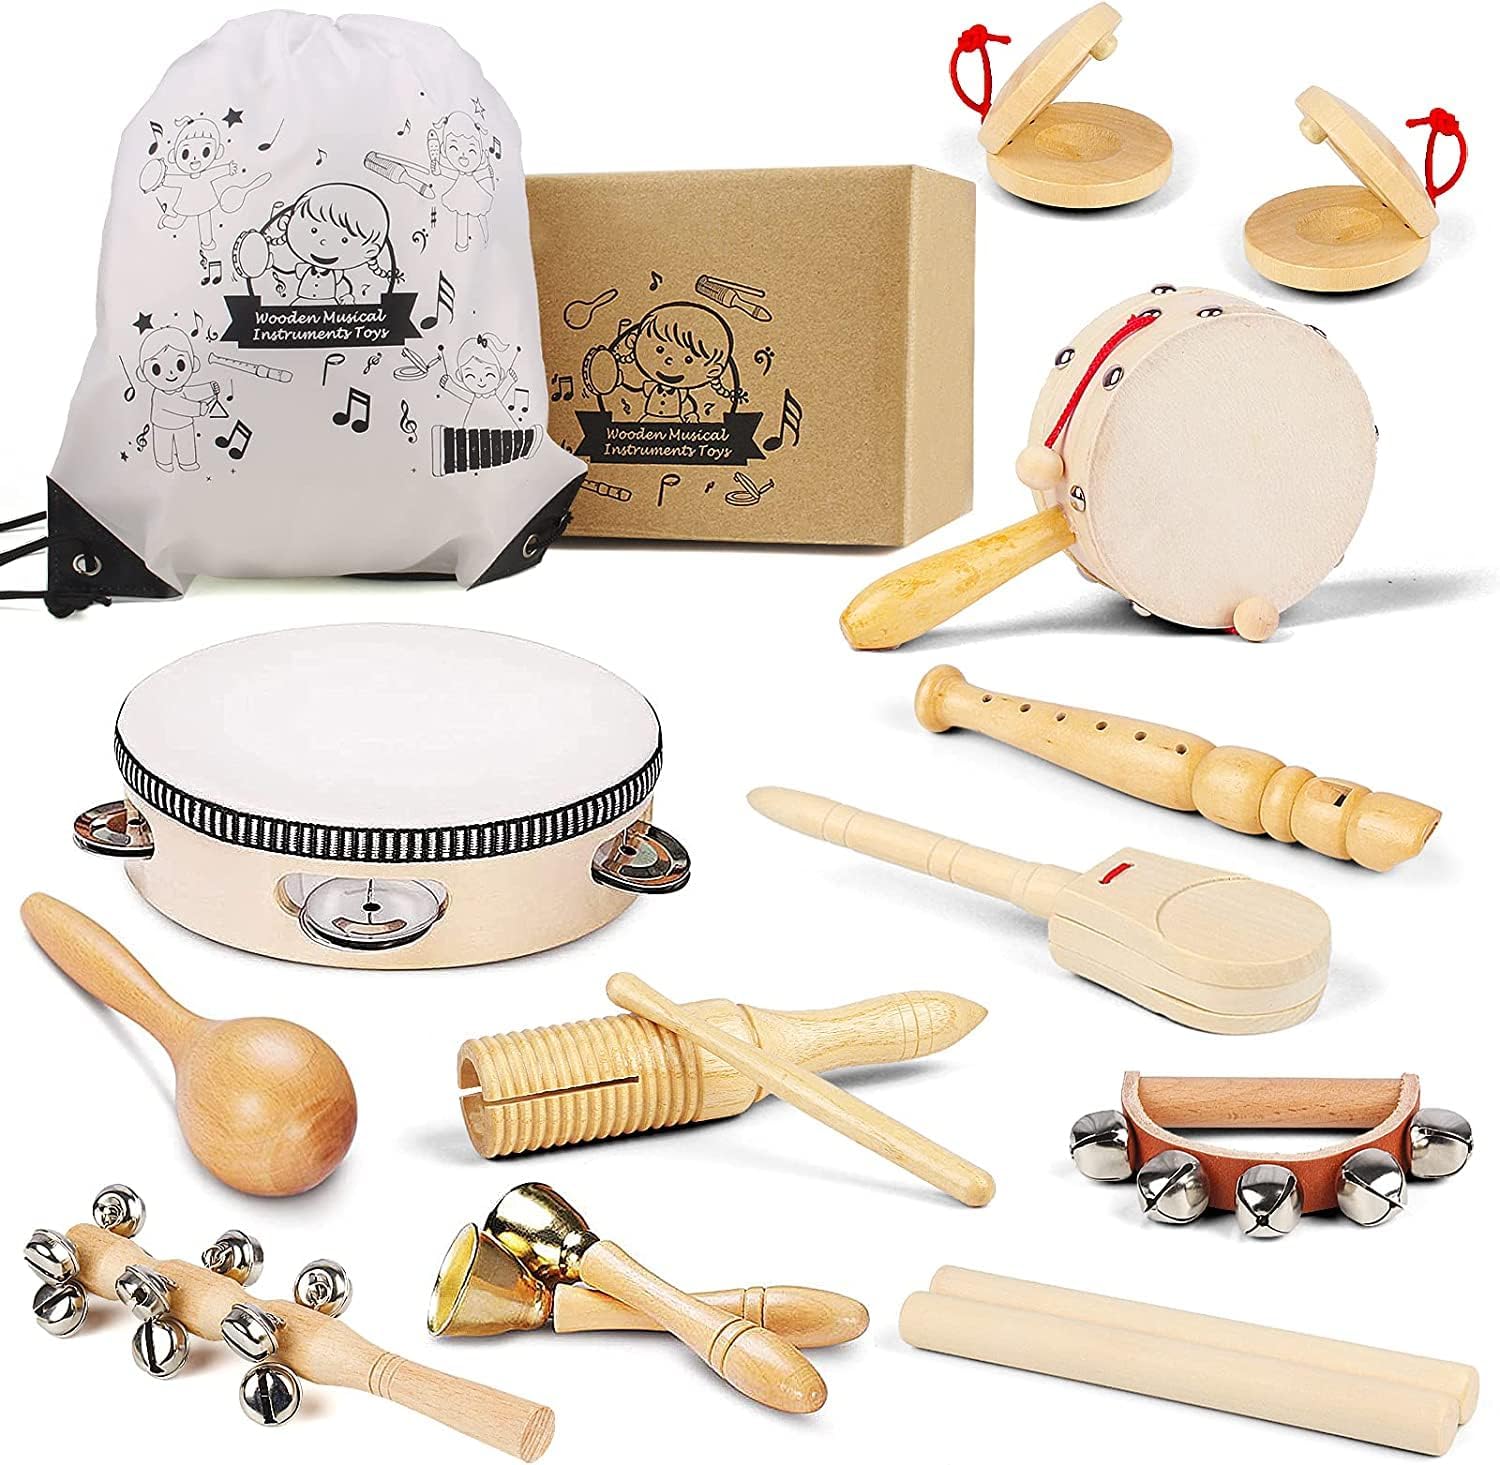 Chriffer Kids Musical Instruments Toys Review